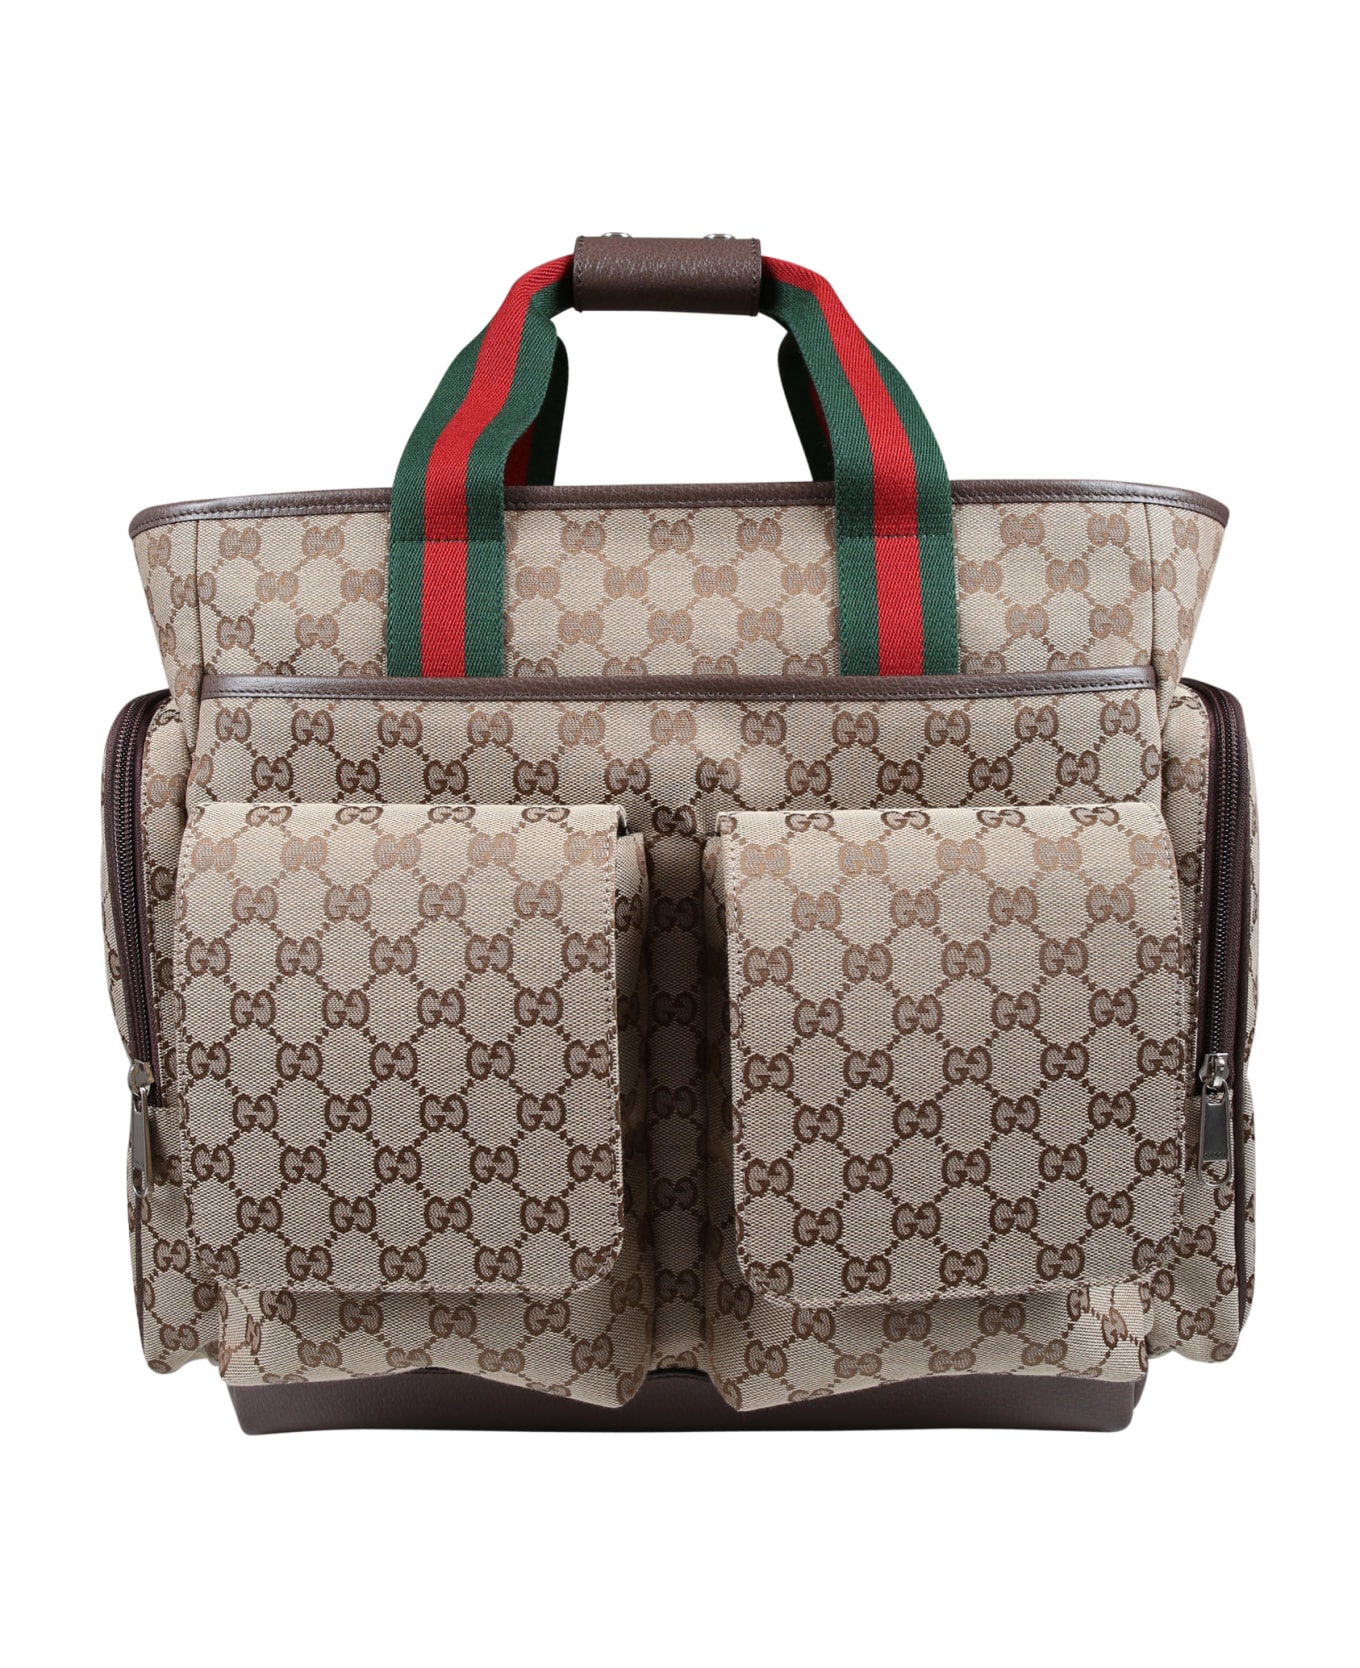 Gucci Beige Mum Bag With All-over Gg Logo - Beige